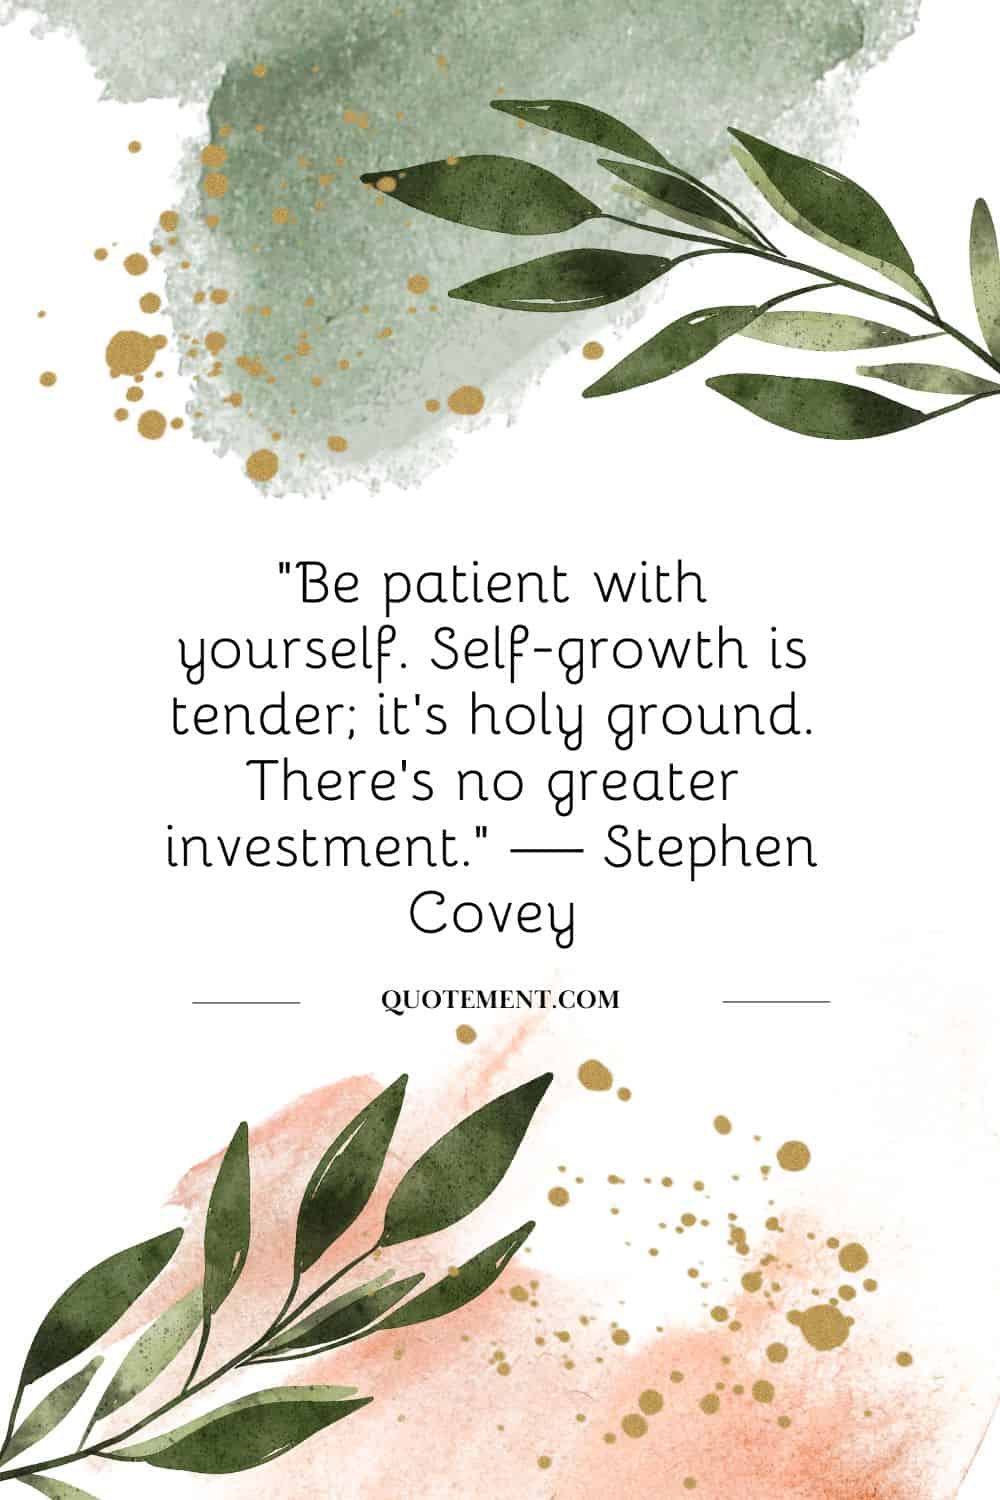 “Be patient with yourself. Self-growth is tender; it’s holy ground. There’s no greater investment.” — Stephen Covey